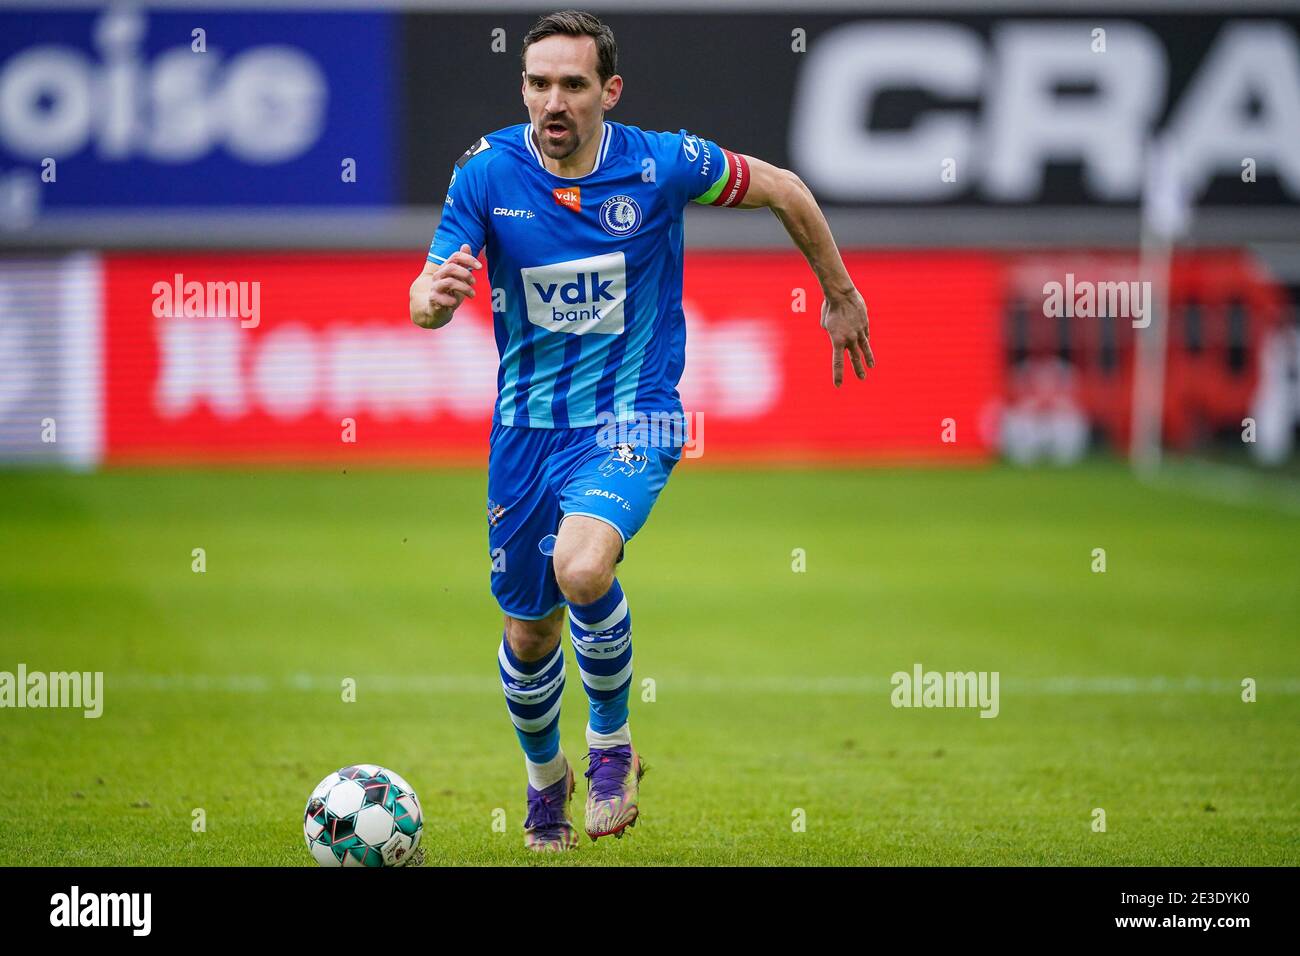 Ghent Belgium January 17 Sven Kums Of Kaa Gent During The Pro League Match Between Kaa Gent And Royal Antwerp Fc At Ghelamco Arena On January 17 Stock Photo Alamy